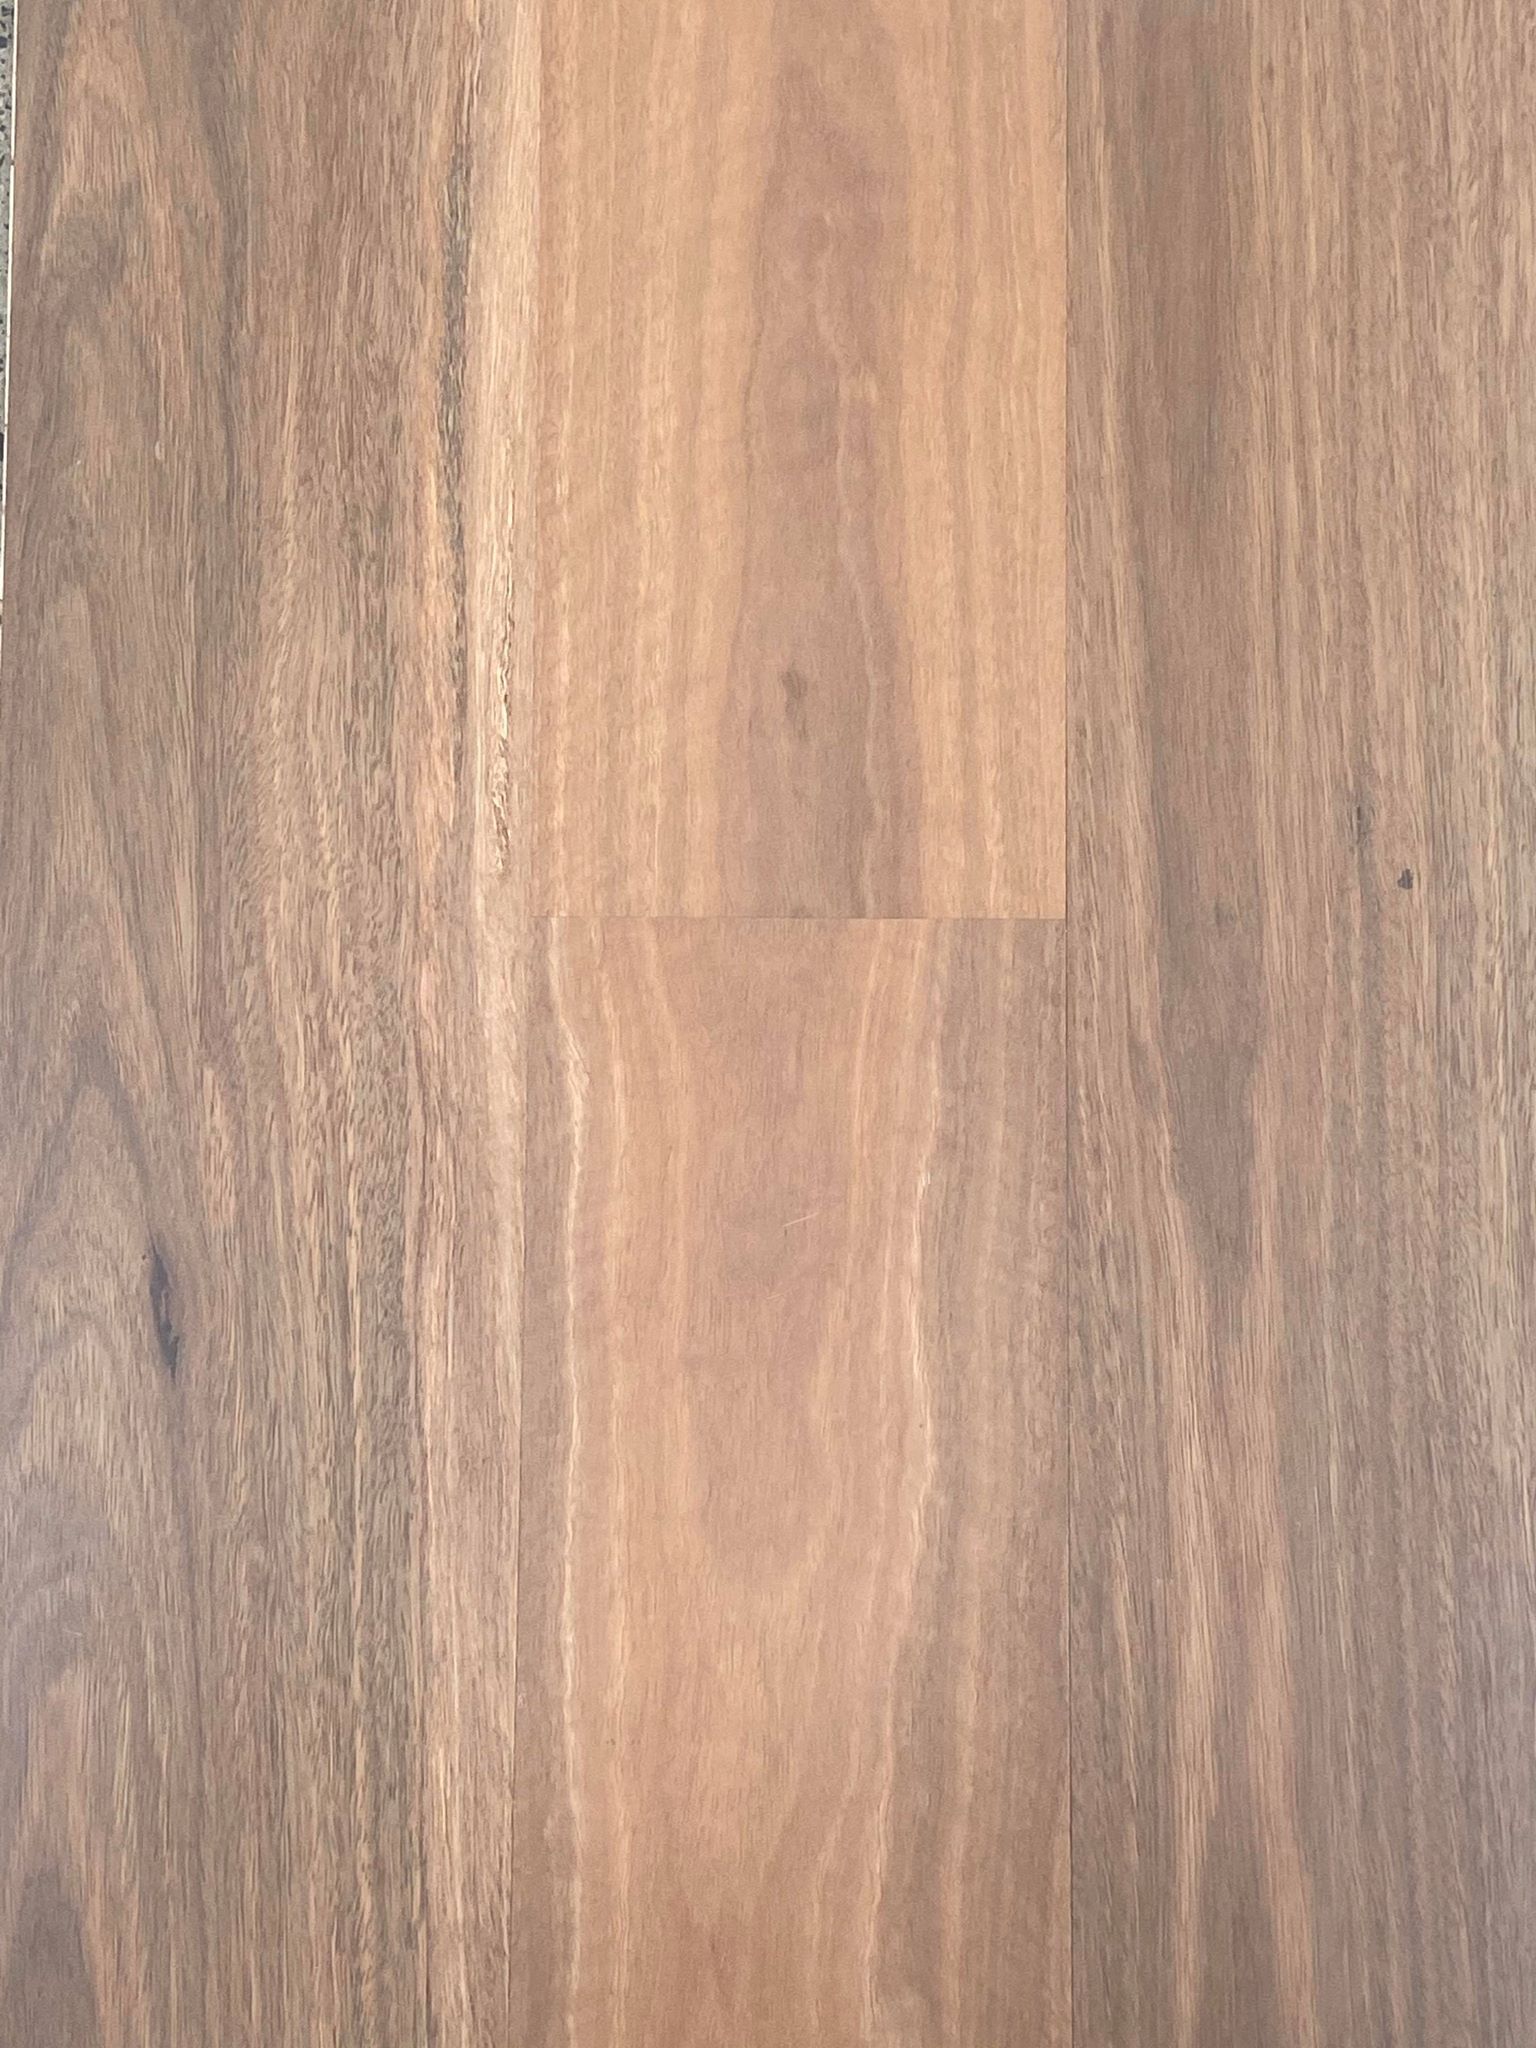 Select Brushed Spotted Gum 180 Engineered Timber Flooring 1820mm X 180mm X 14 3mm Flooring World